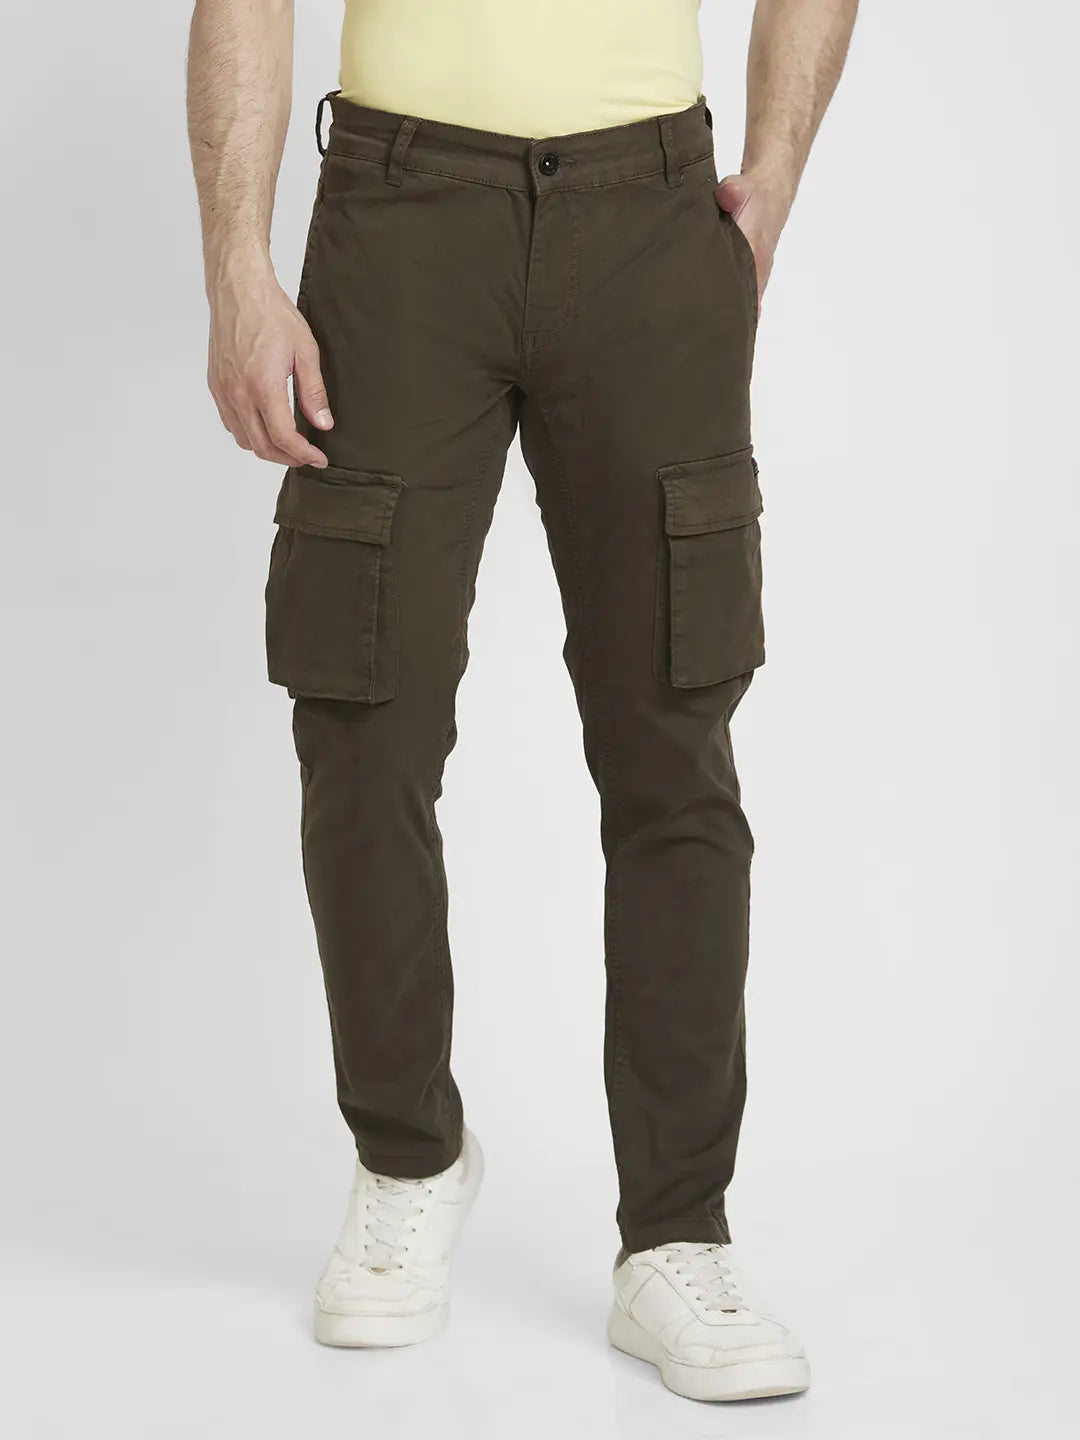 Jeans & Pants | Olive Green Cargo Pant, All new, Not Used | Freeup